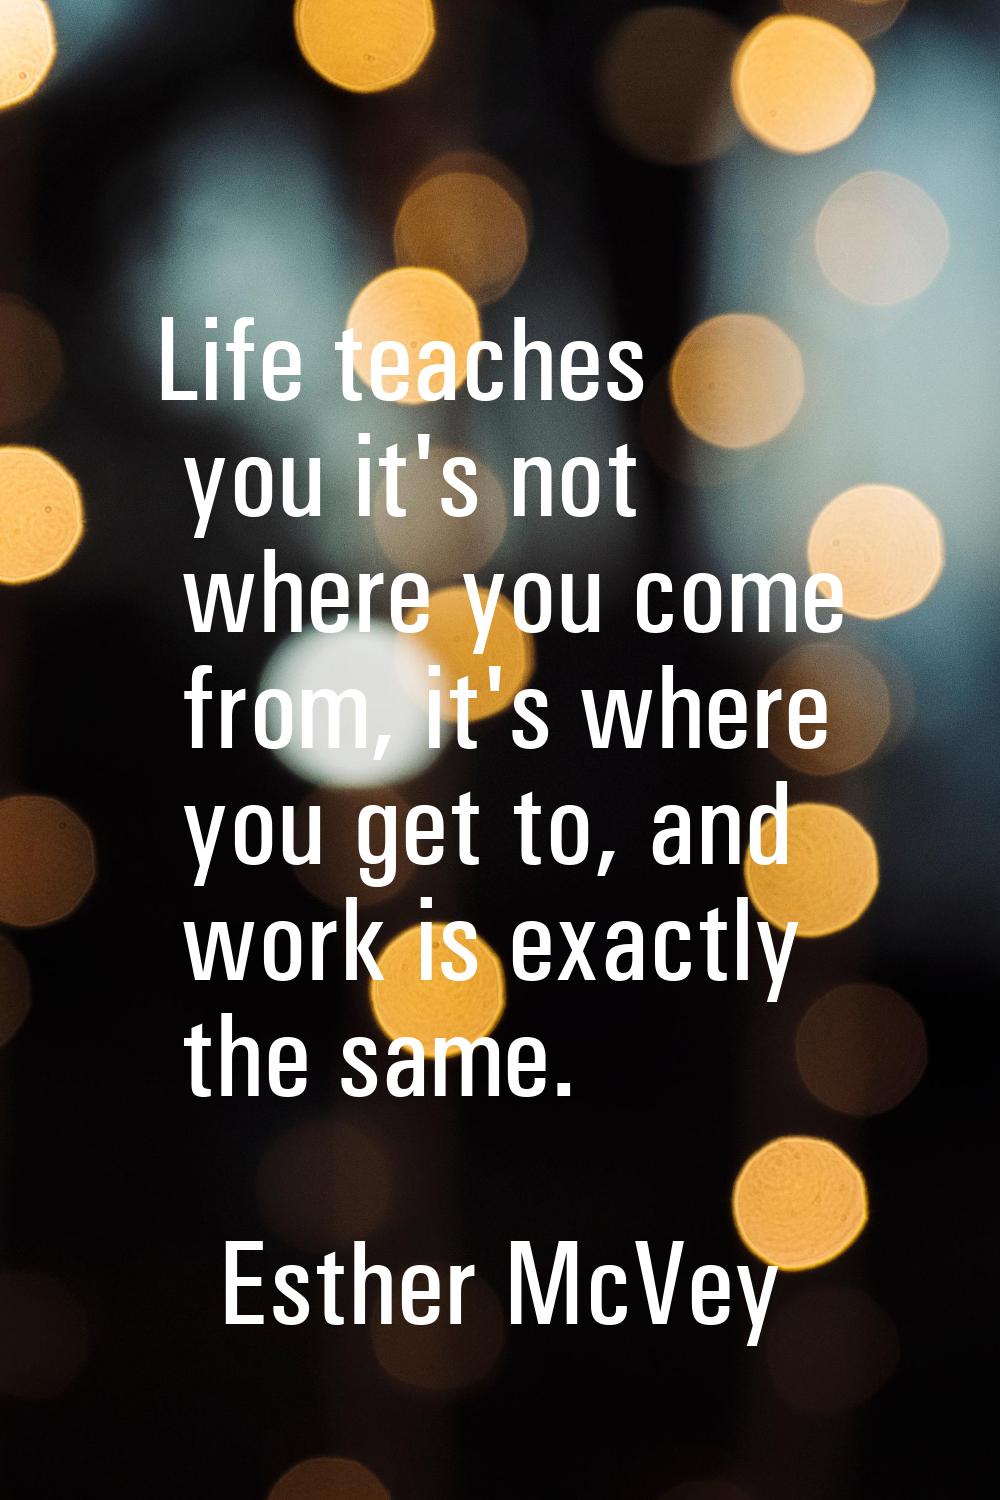 Life teaches you it's not where you come from, it's where you get to, and work is exactly the same.